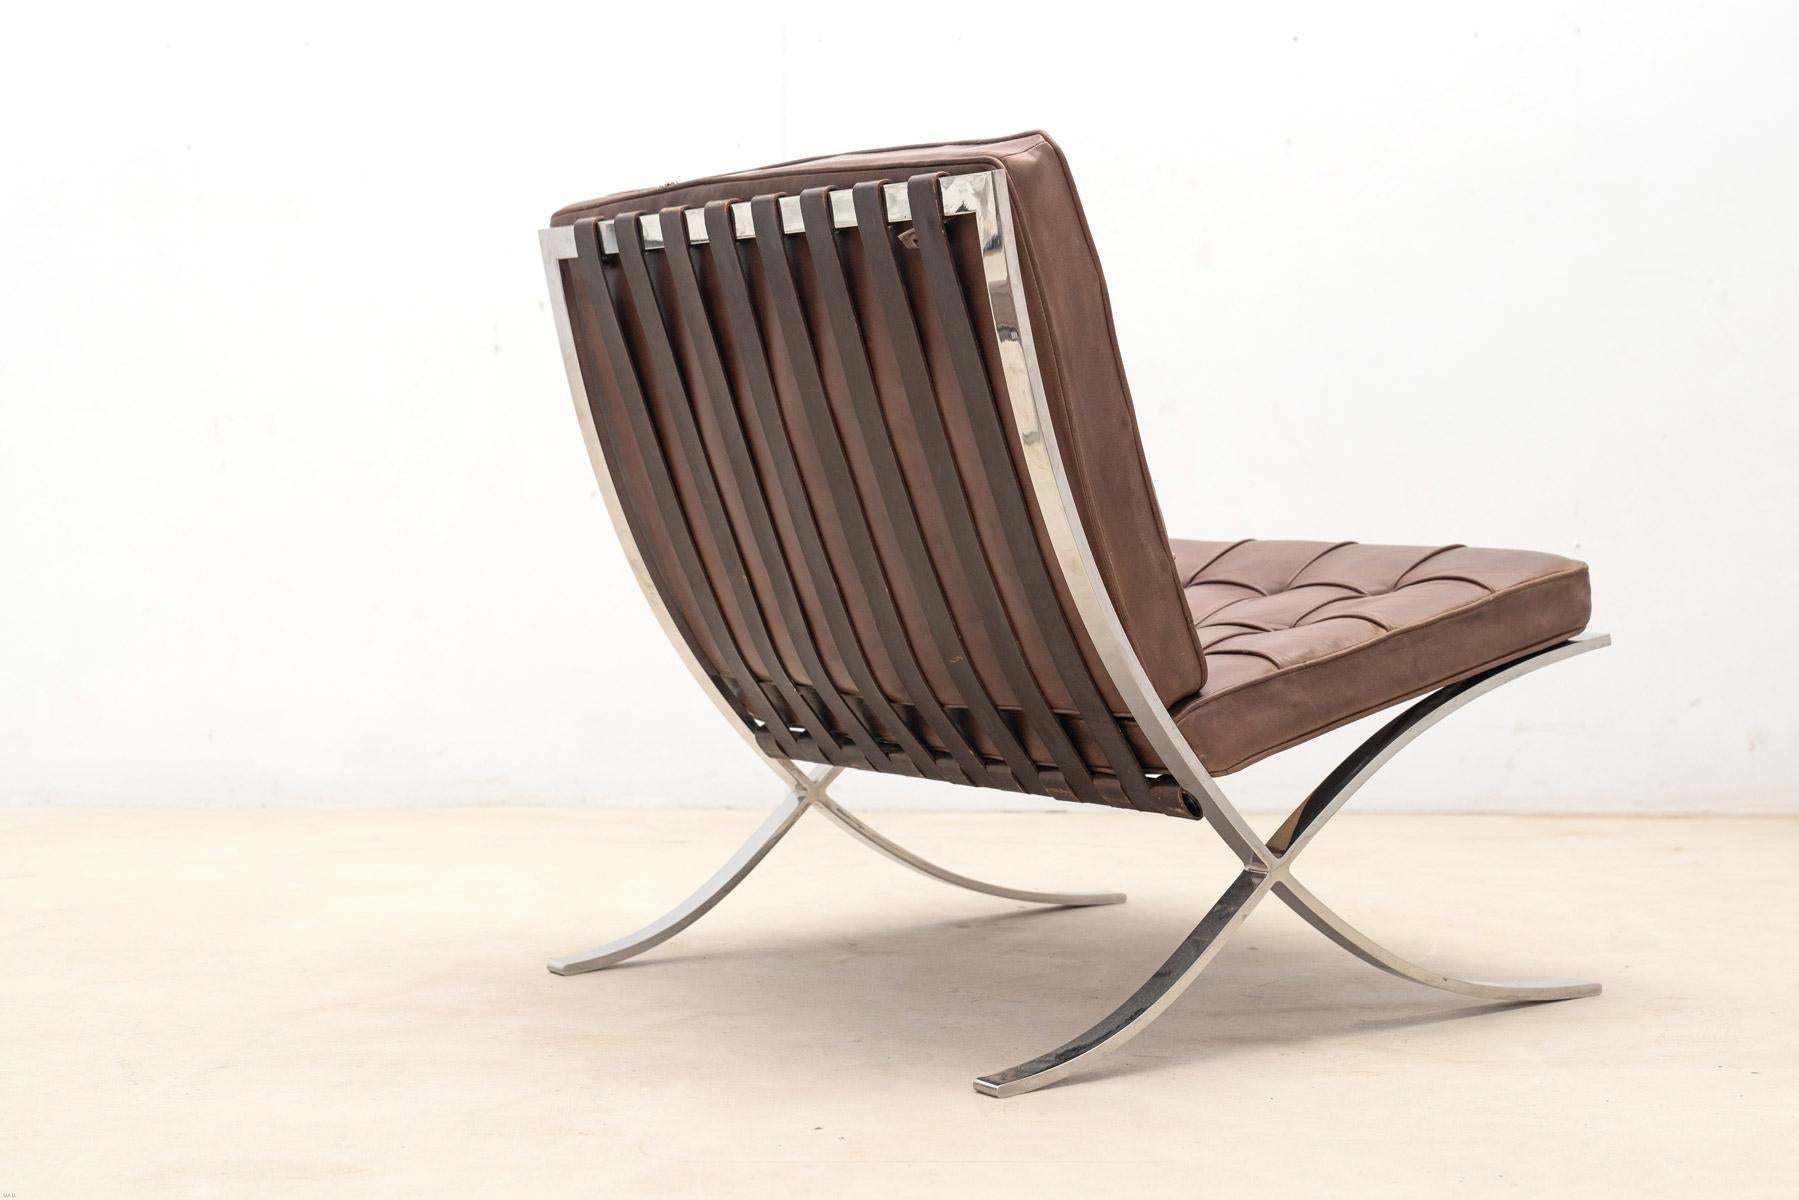  Early Barcelona Chair by Mies Van Der Rohe  For Sale 2